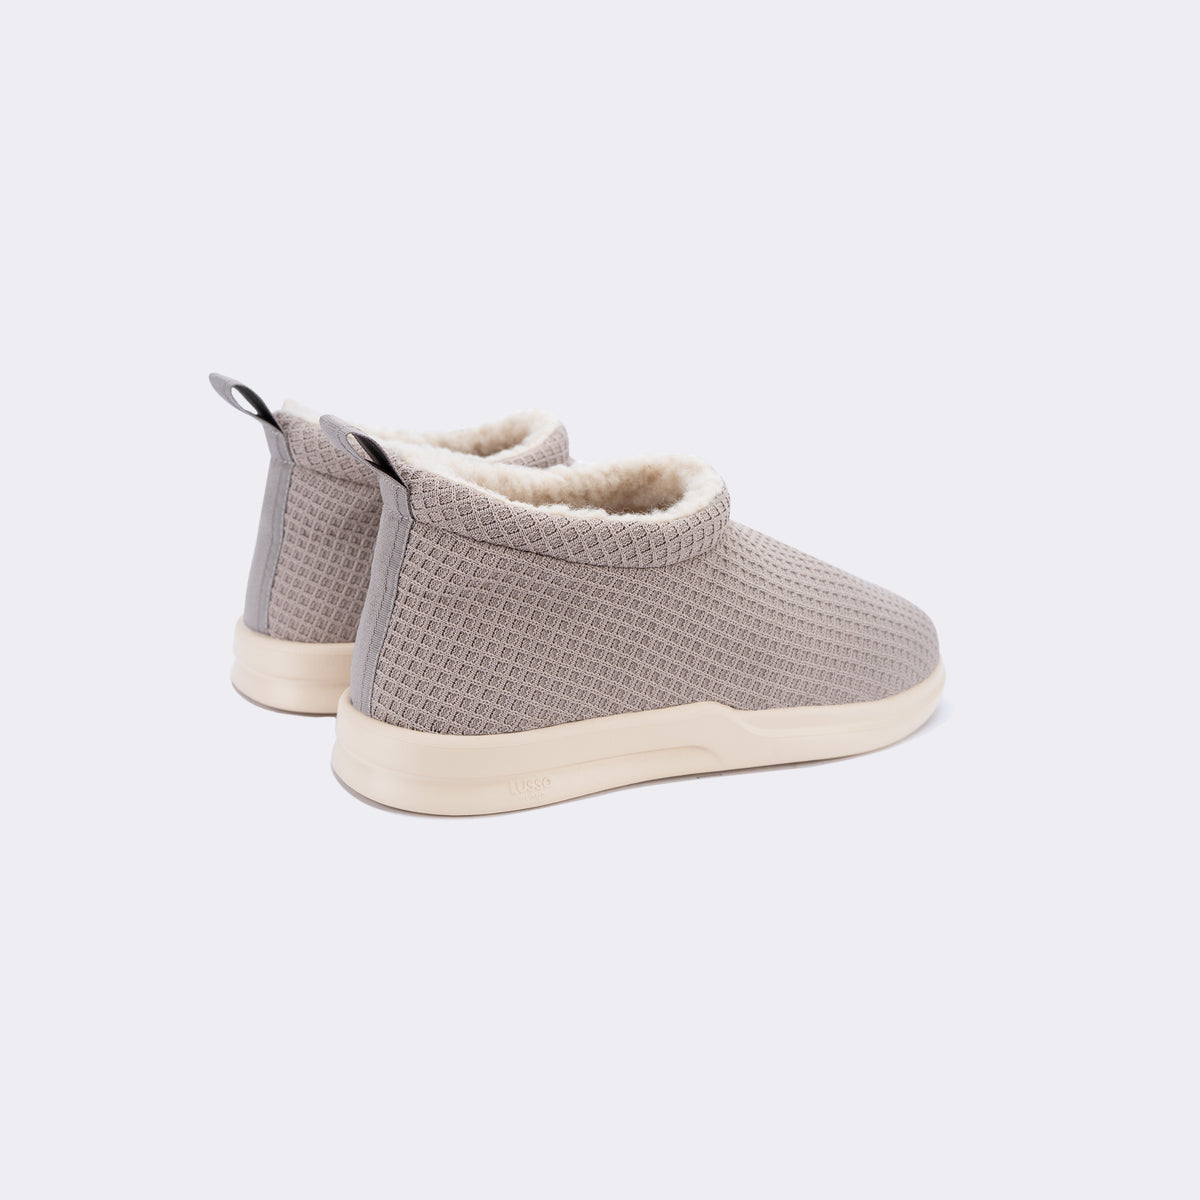 light grey shearling lined waffle knit slip on shoe with white sole 